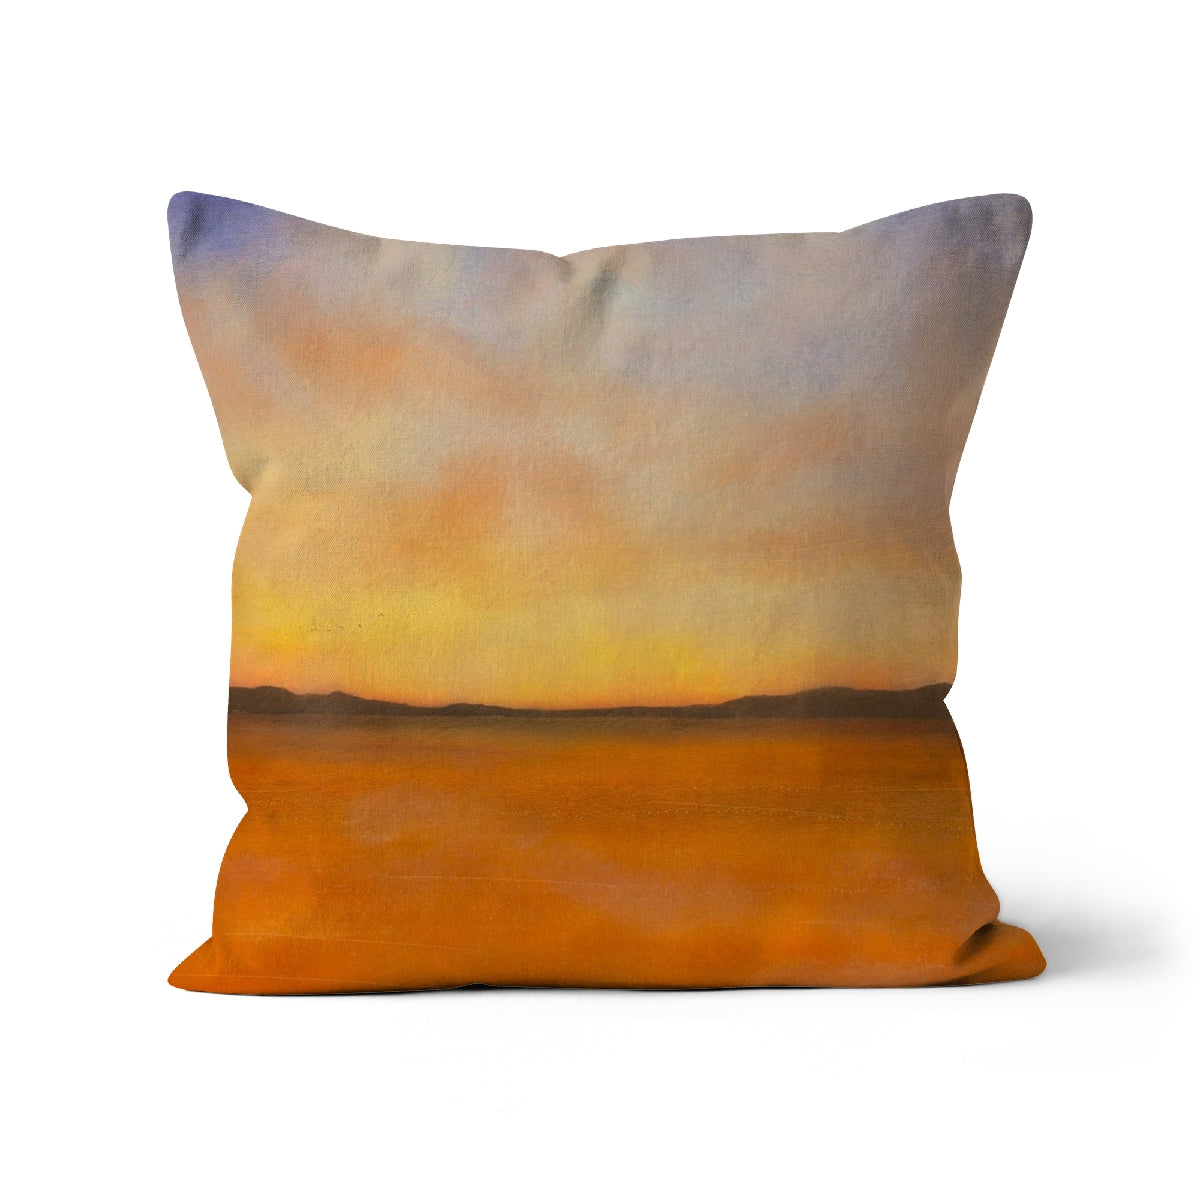 Islay Dawn Art Gifts Cushion-Cushions-Hebridean Islands Art Gallery-Canvas-18"x18"-Paintings, Prints, Homeware, Art Gifts From Scotland By Scottish Artist Kevin Hunter